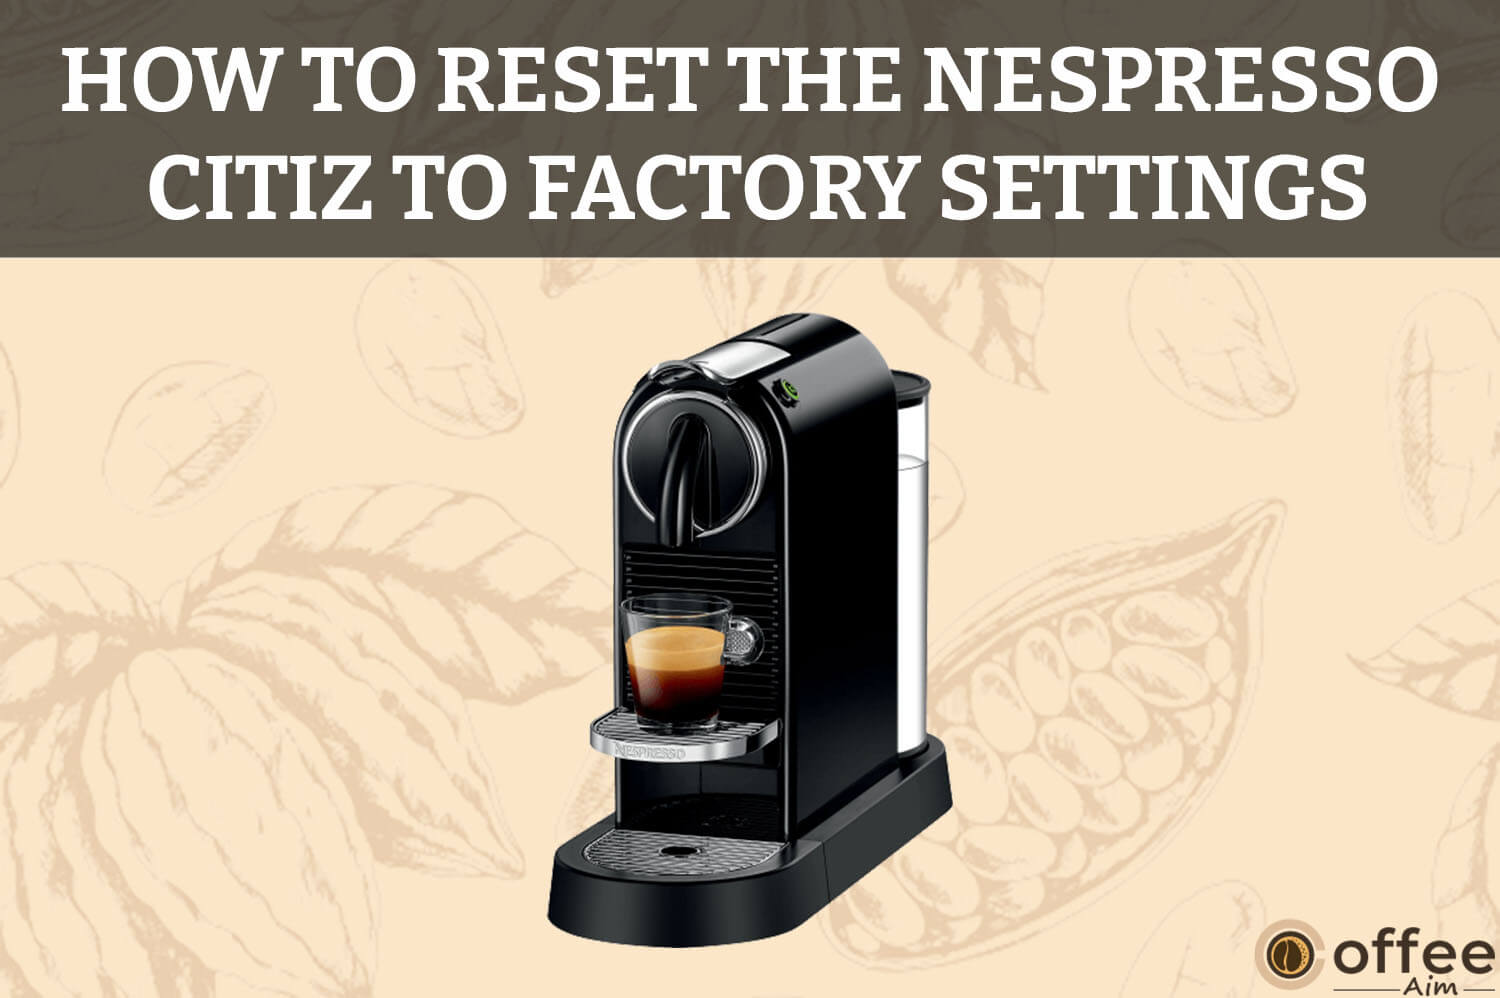 How-To-Reset-The-Nespresso-Citiz-To-Factory-Settings